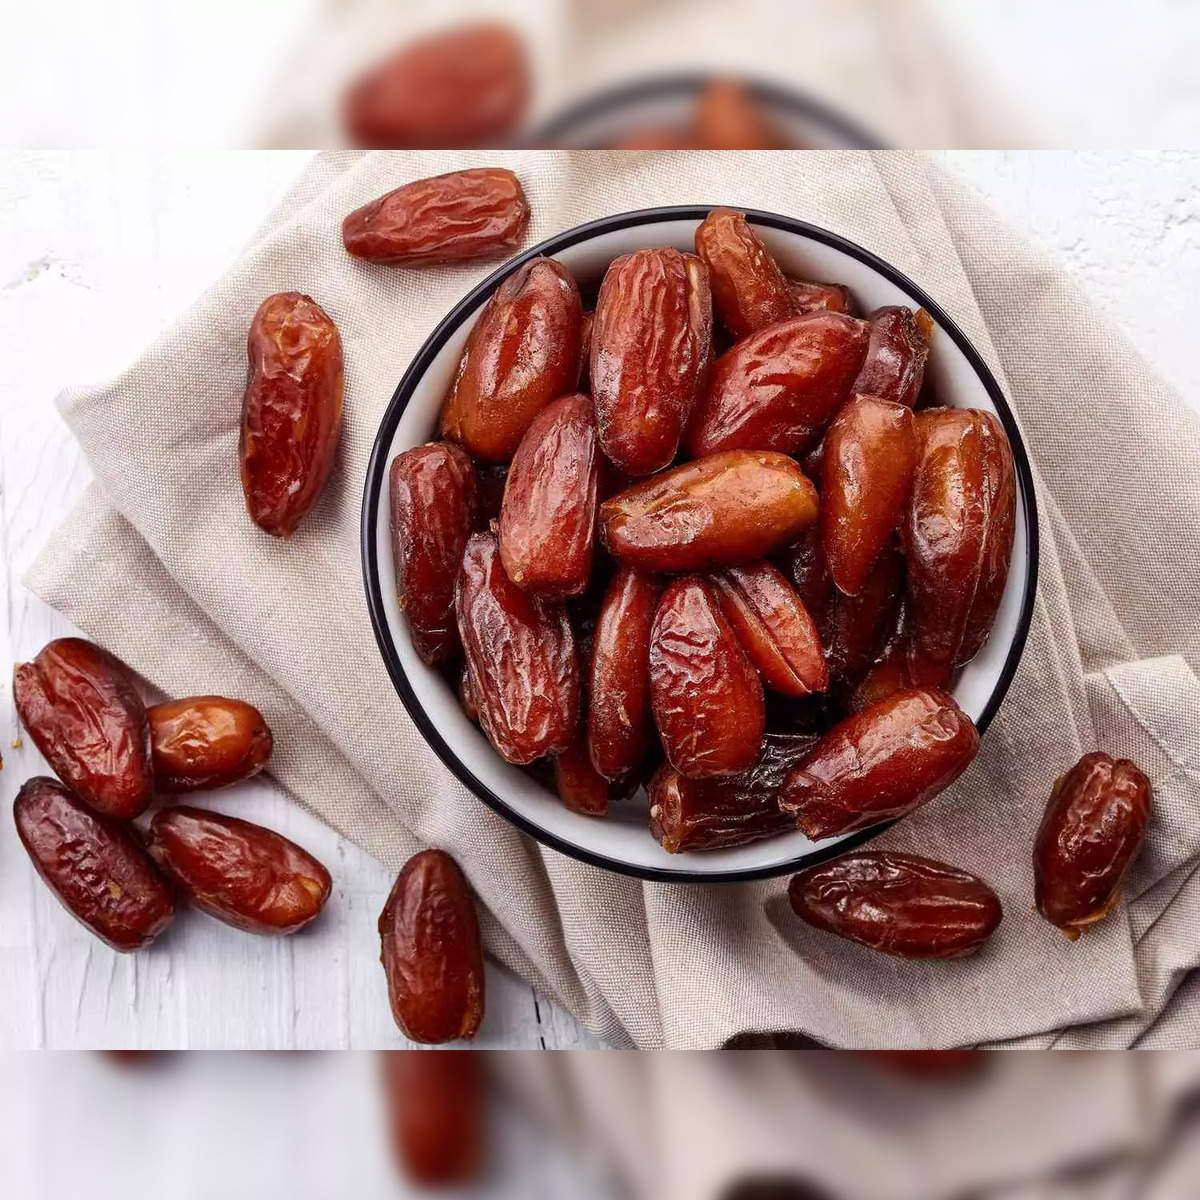 Best dates: 10 best dates/khajur for ultimate taste, flavour and  nutritional goodness - The Economic Times